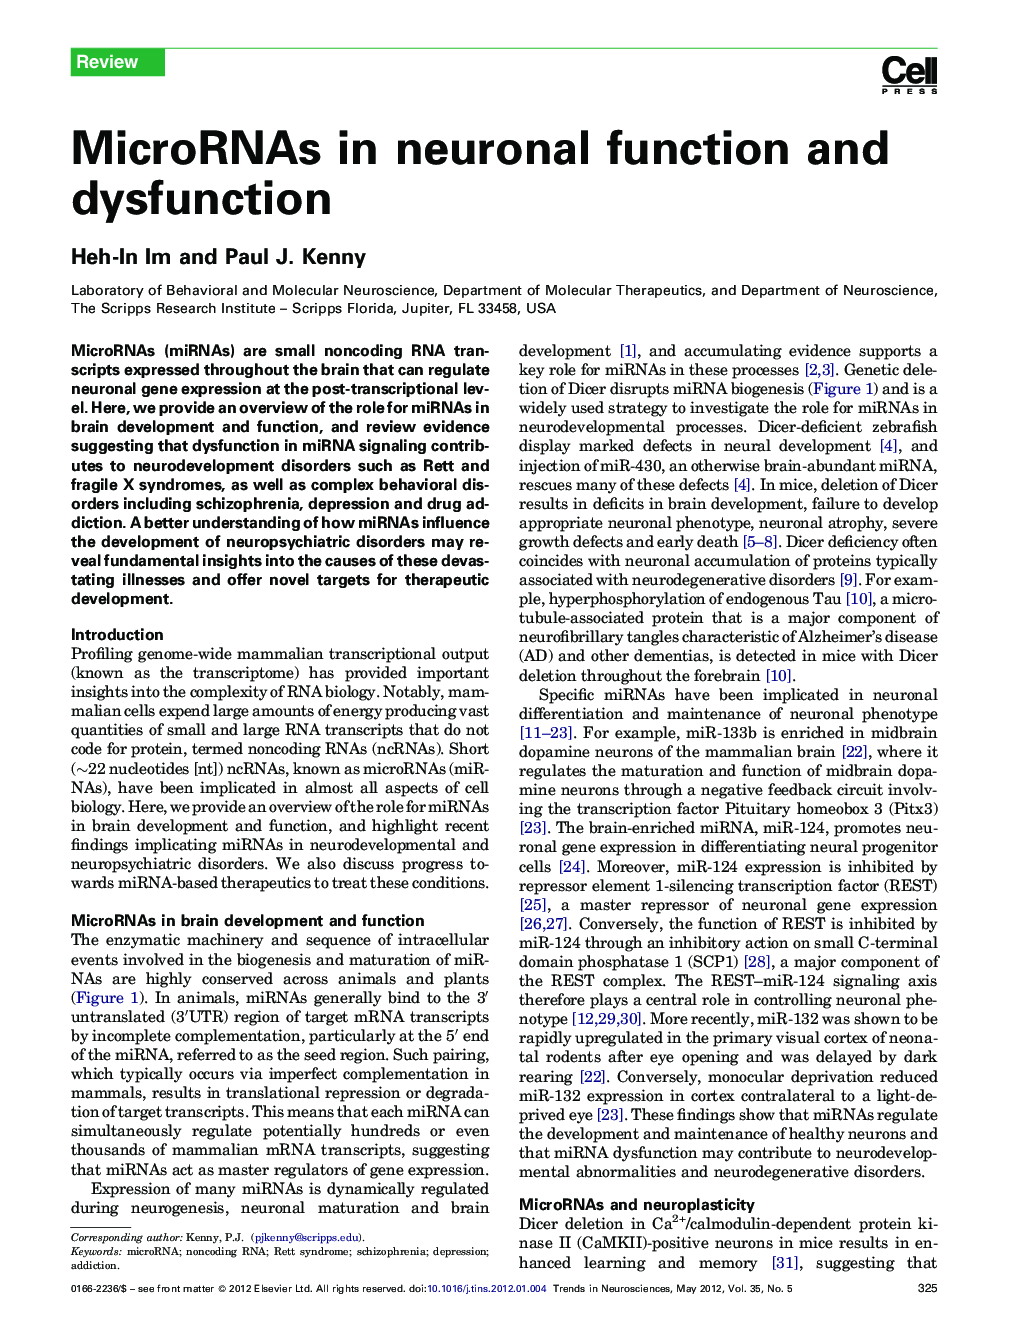 MicroRNAs in neuronal function and dysfunction